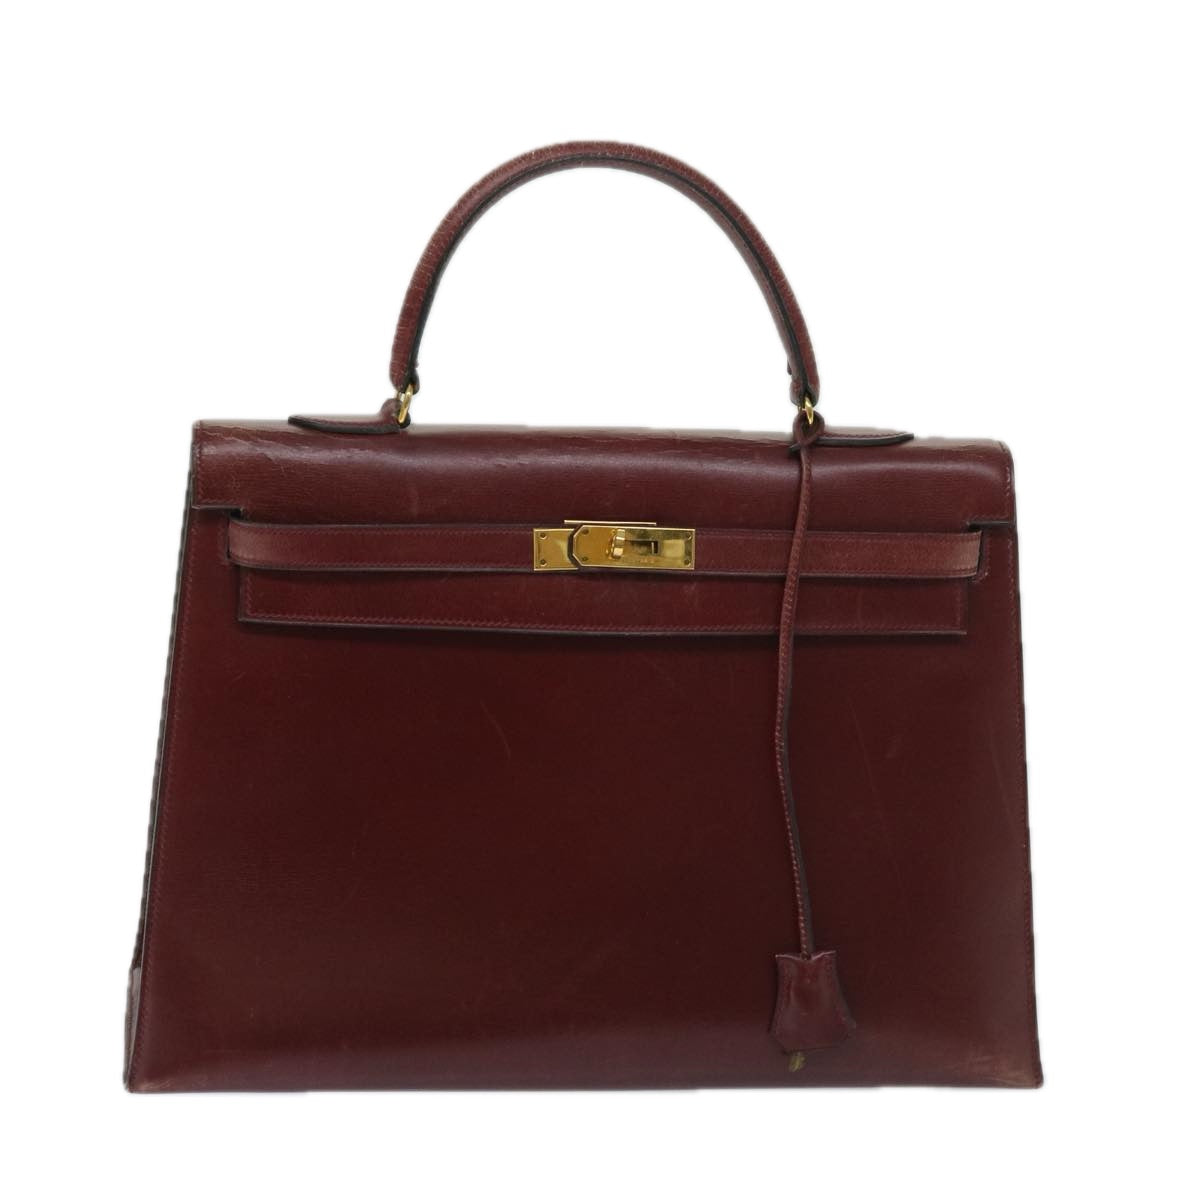 HERMES Kelly 35 Hand Bag Leather Bordeaux Auth 68891 - 0